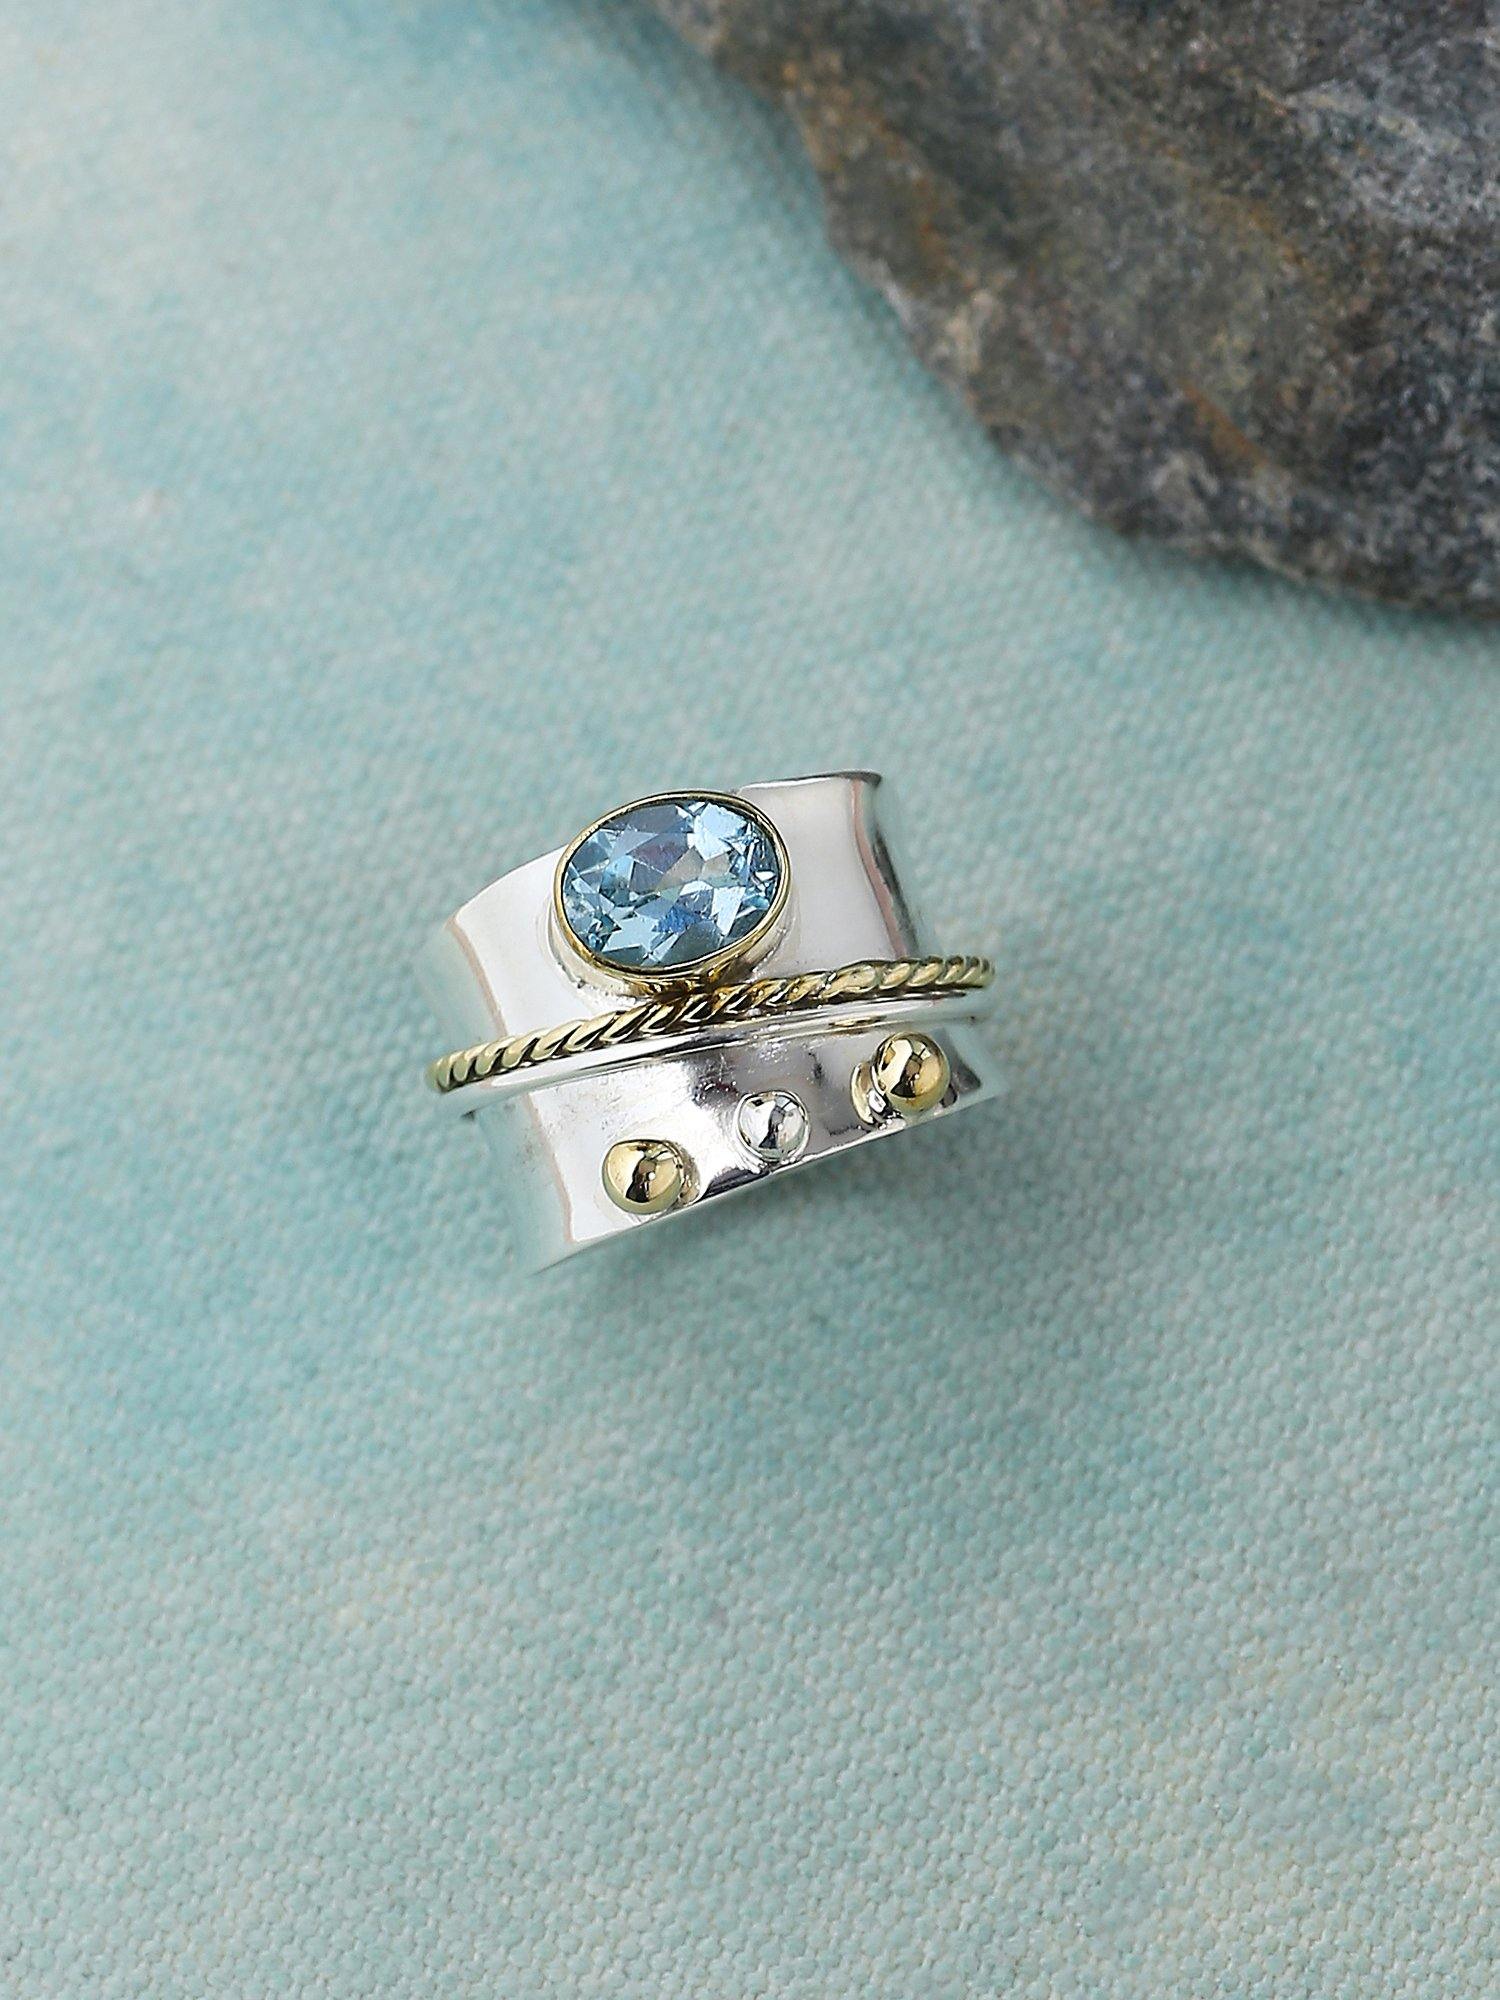 Blue Topaz Solid 925 Sterling Silver Brass Two Tone Designer Ring Jewelry - YoTreasure